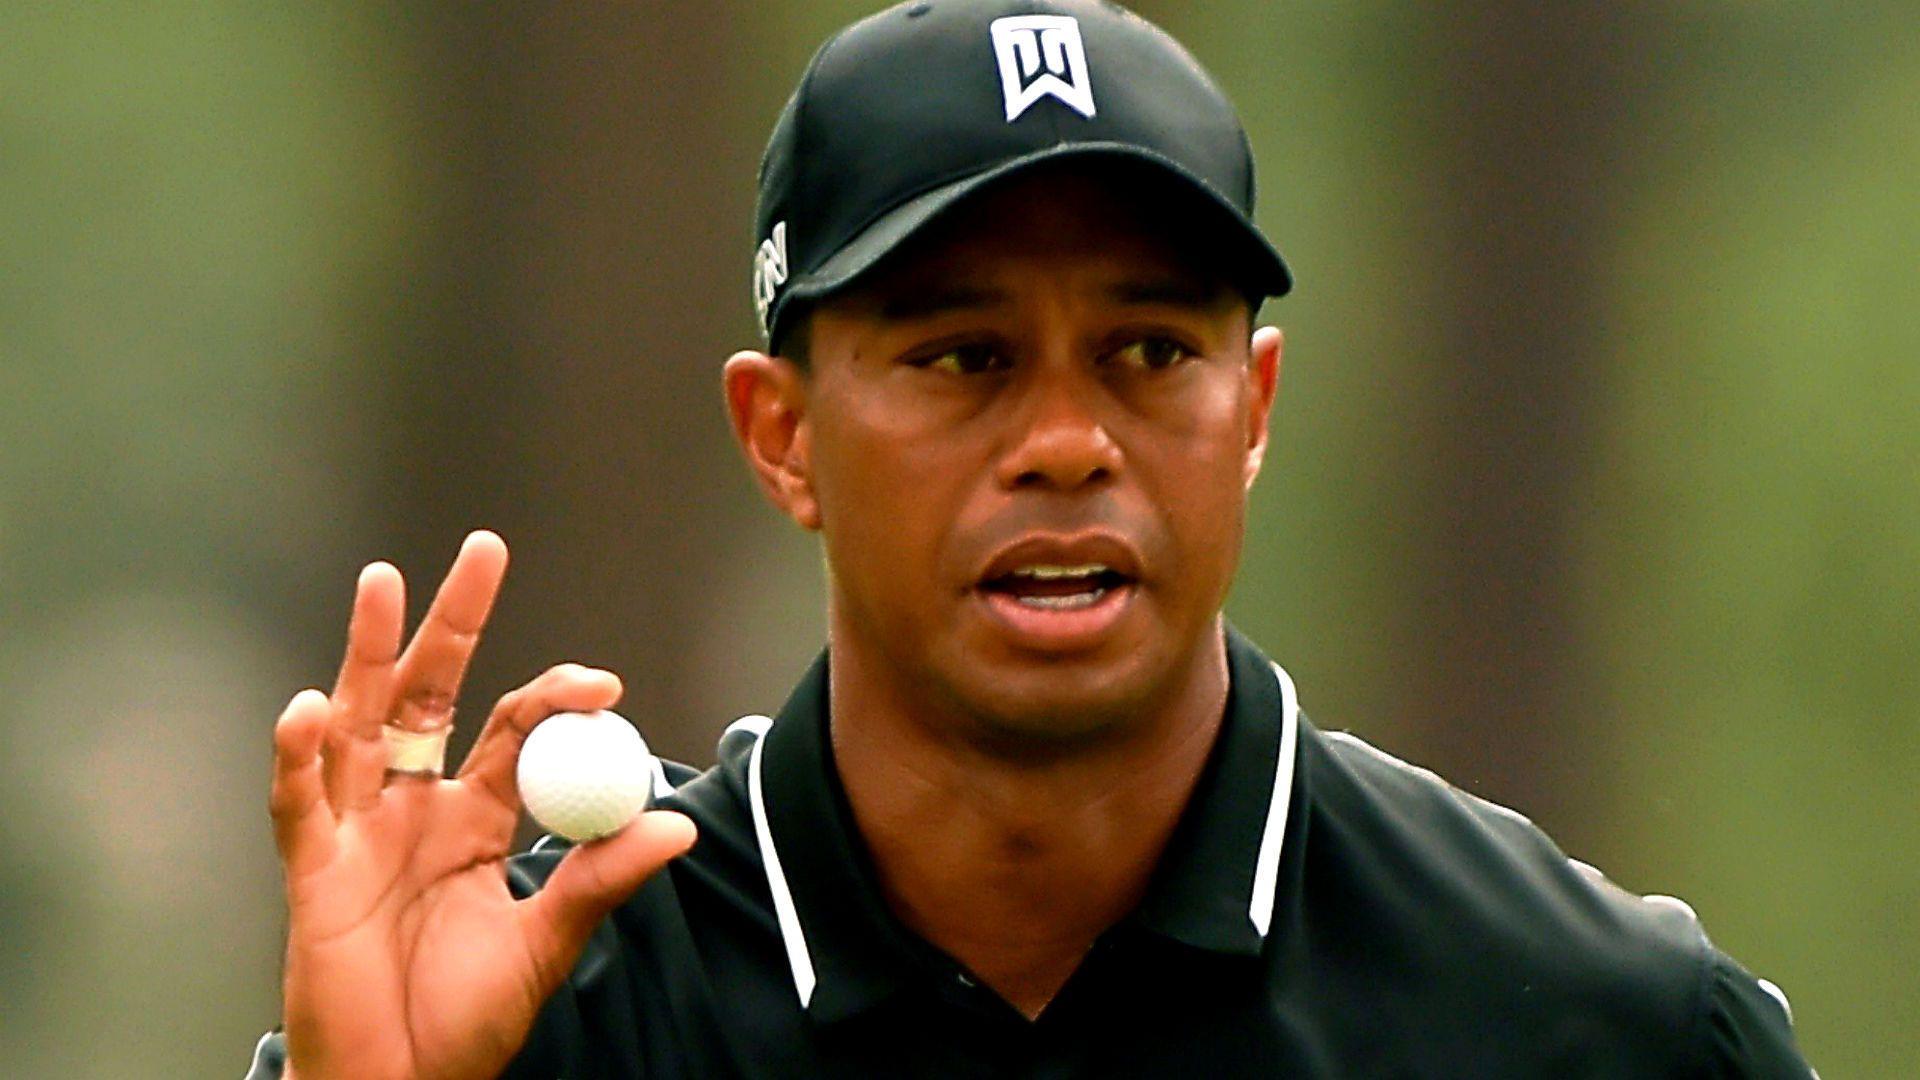 Tiger Woods Wallpaper Image Photo Picture Background